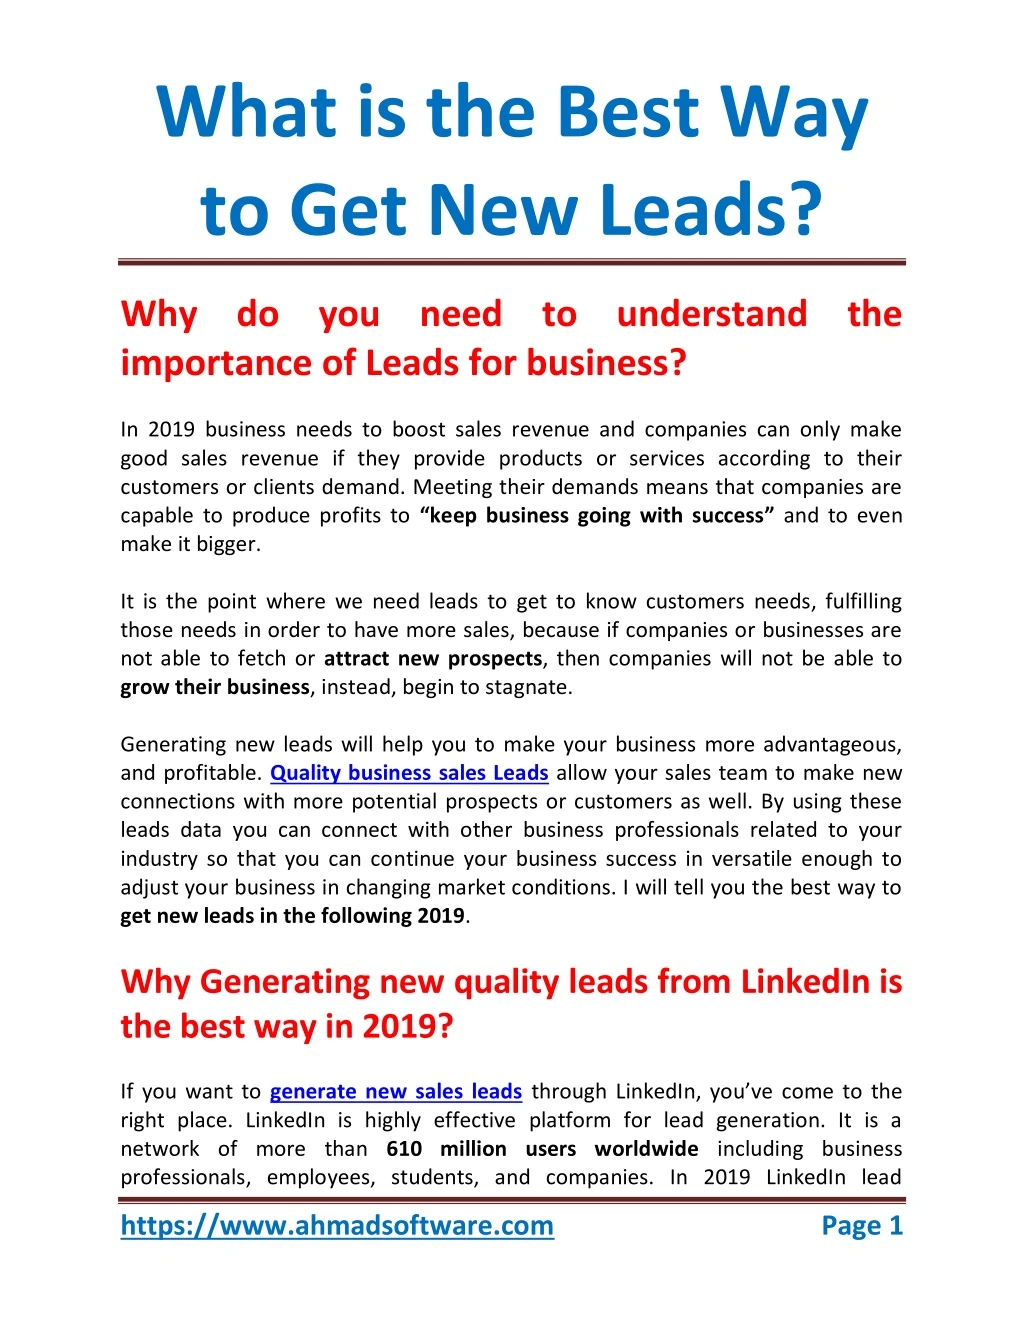 what is the best way to get new leads